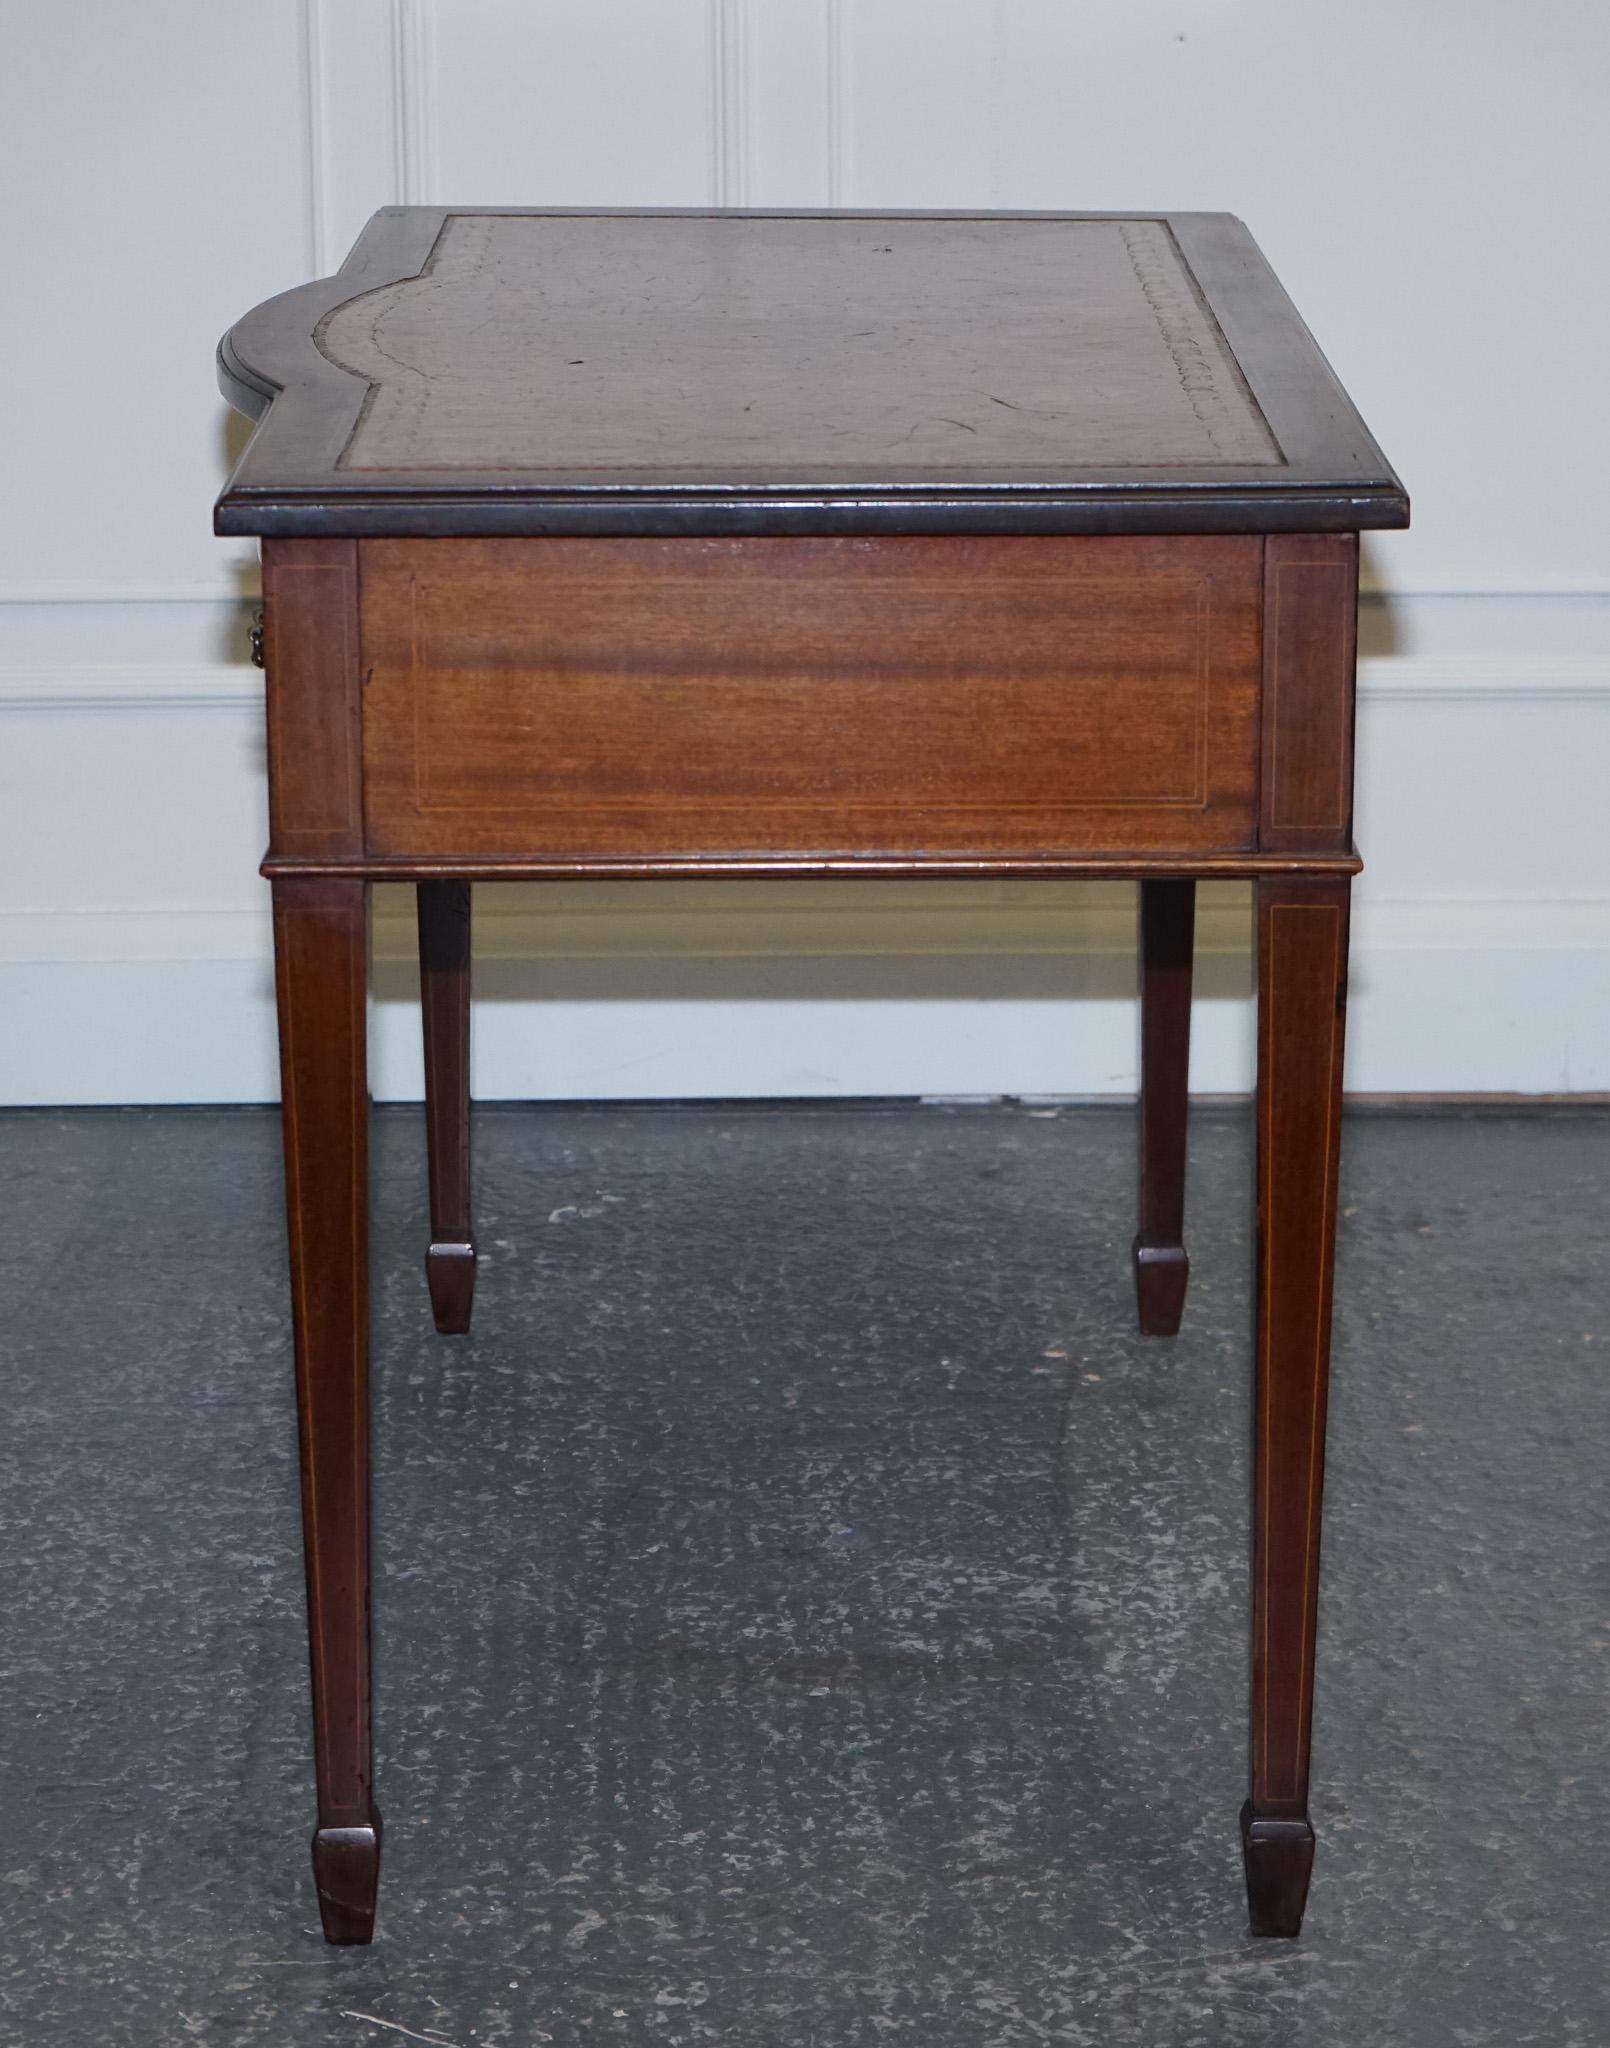 EDWARDIAN 1880er Jahre STAMPED MAPLE & CO BROWN LEATHER SHERATON WRITING DESK TABLE  im Angebot 3